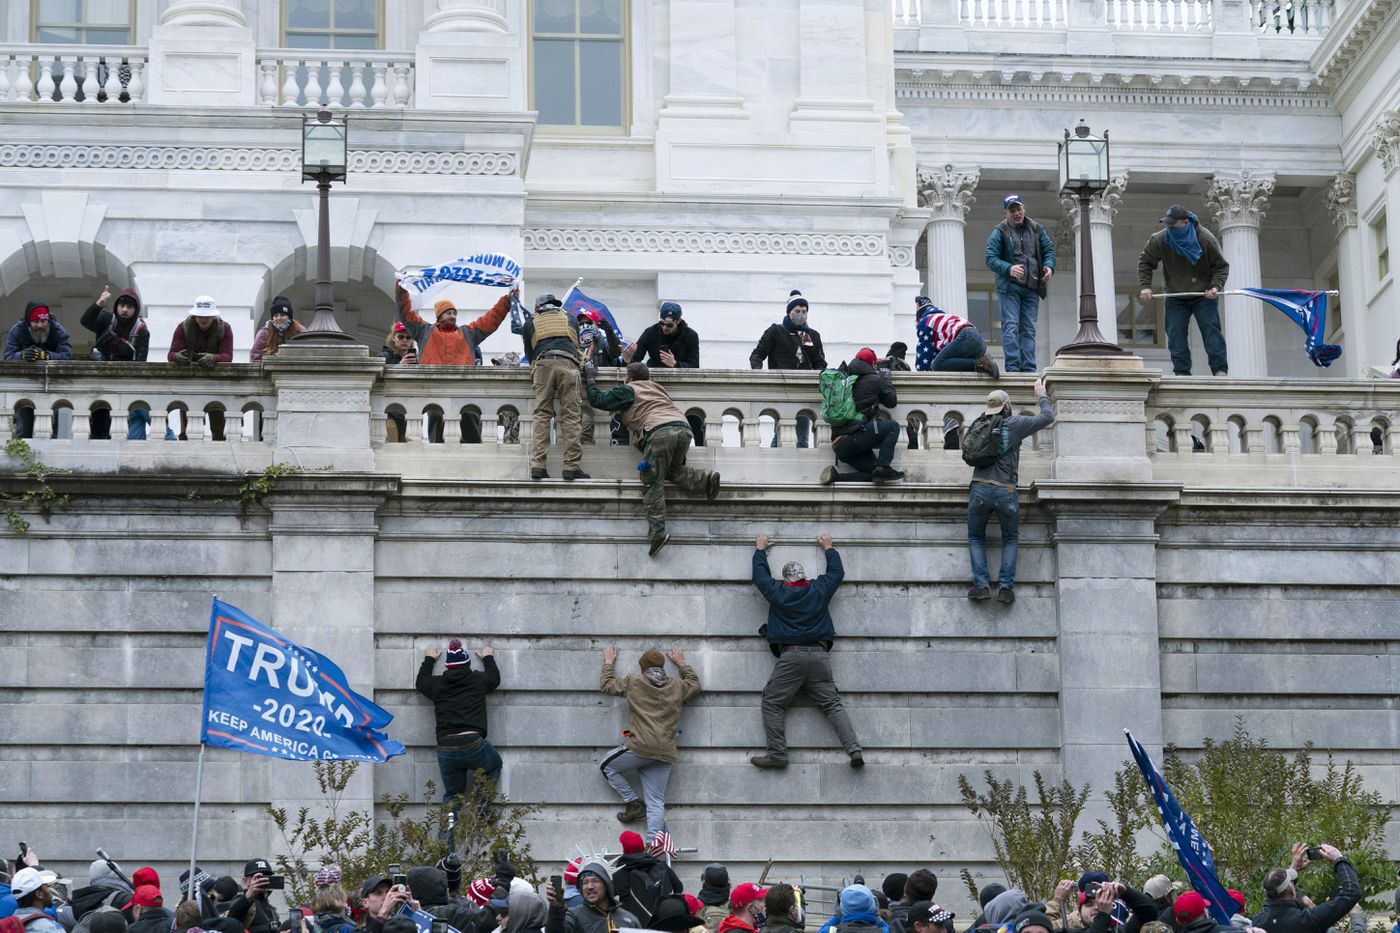 Supporters of President Donald Trump climb the west wall of the U.S. Capitol after overwhelming police during a riot on Wednesday, Jan. 6, 2021, in Washington, D.C.